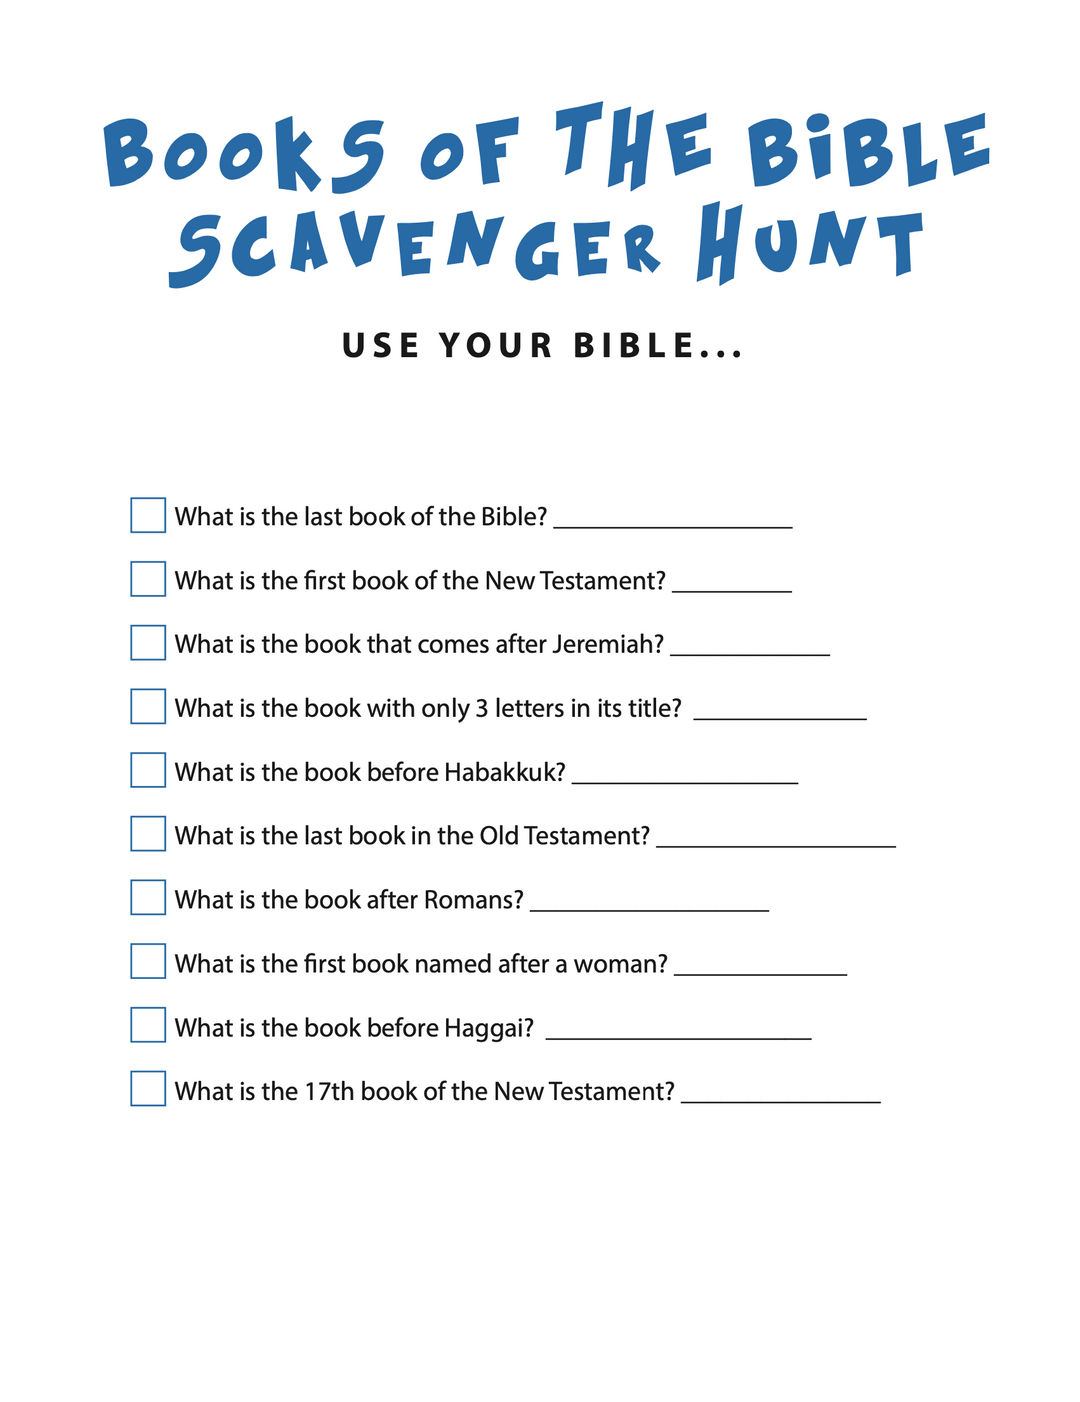 Books of the Bible Scavenger Hunt